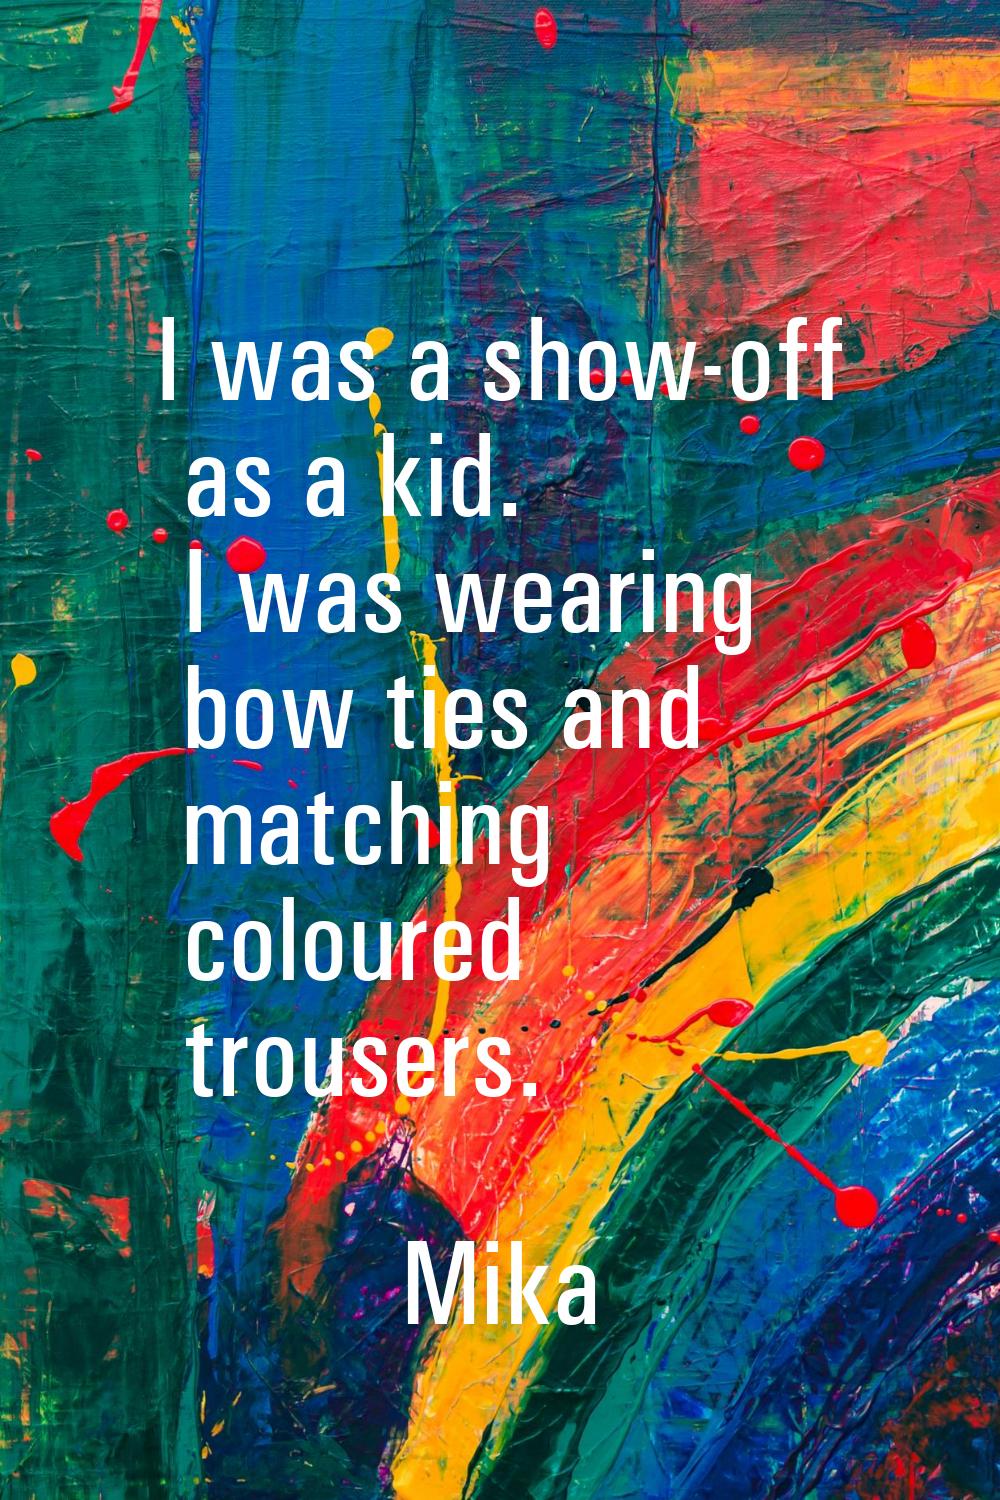 I was a show-off as a kid. I was wearing bow ties and matching coloured trousers.